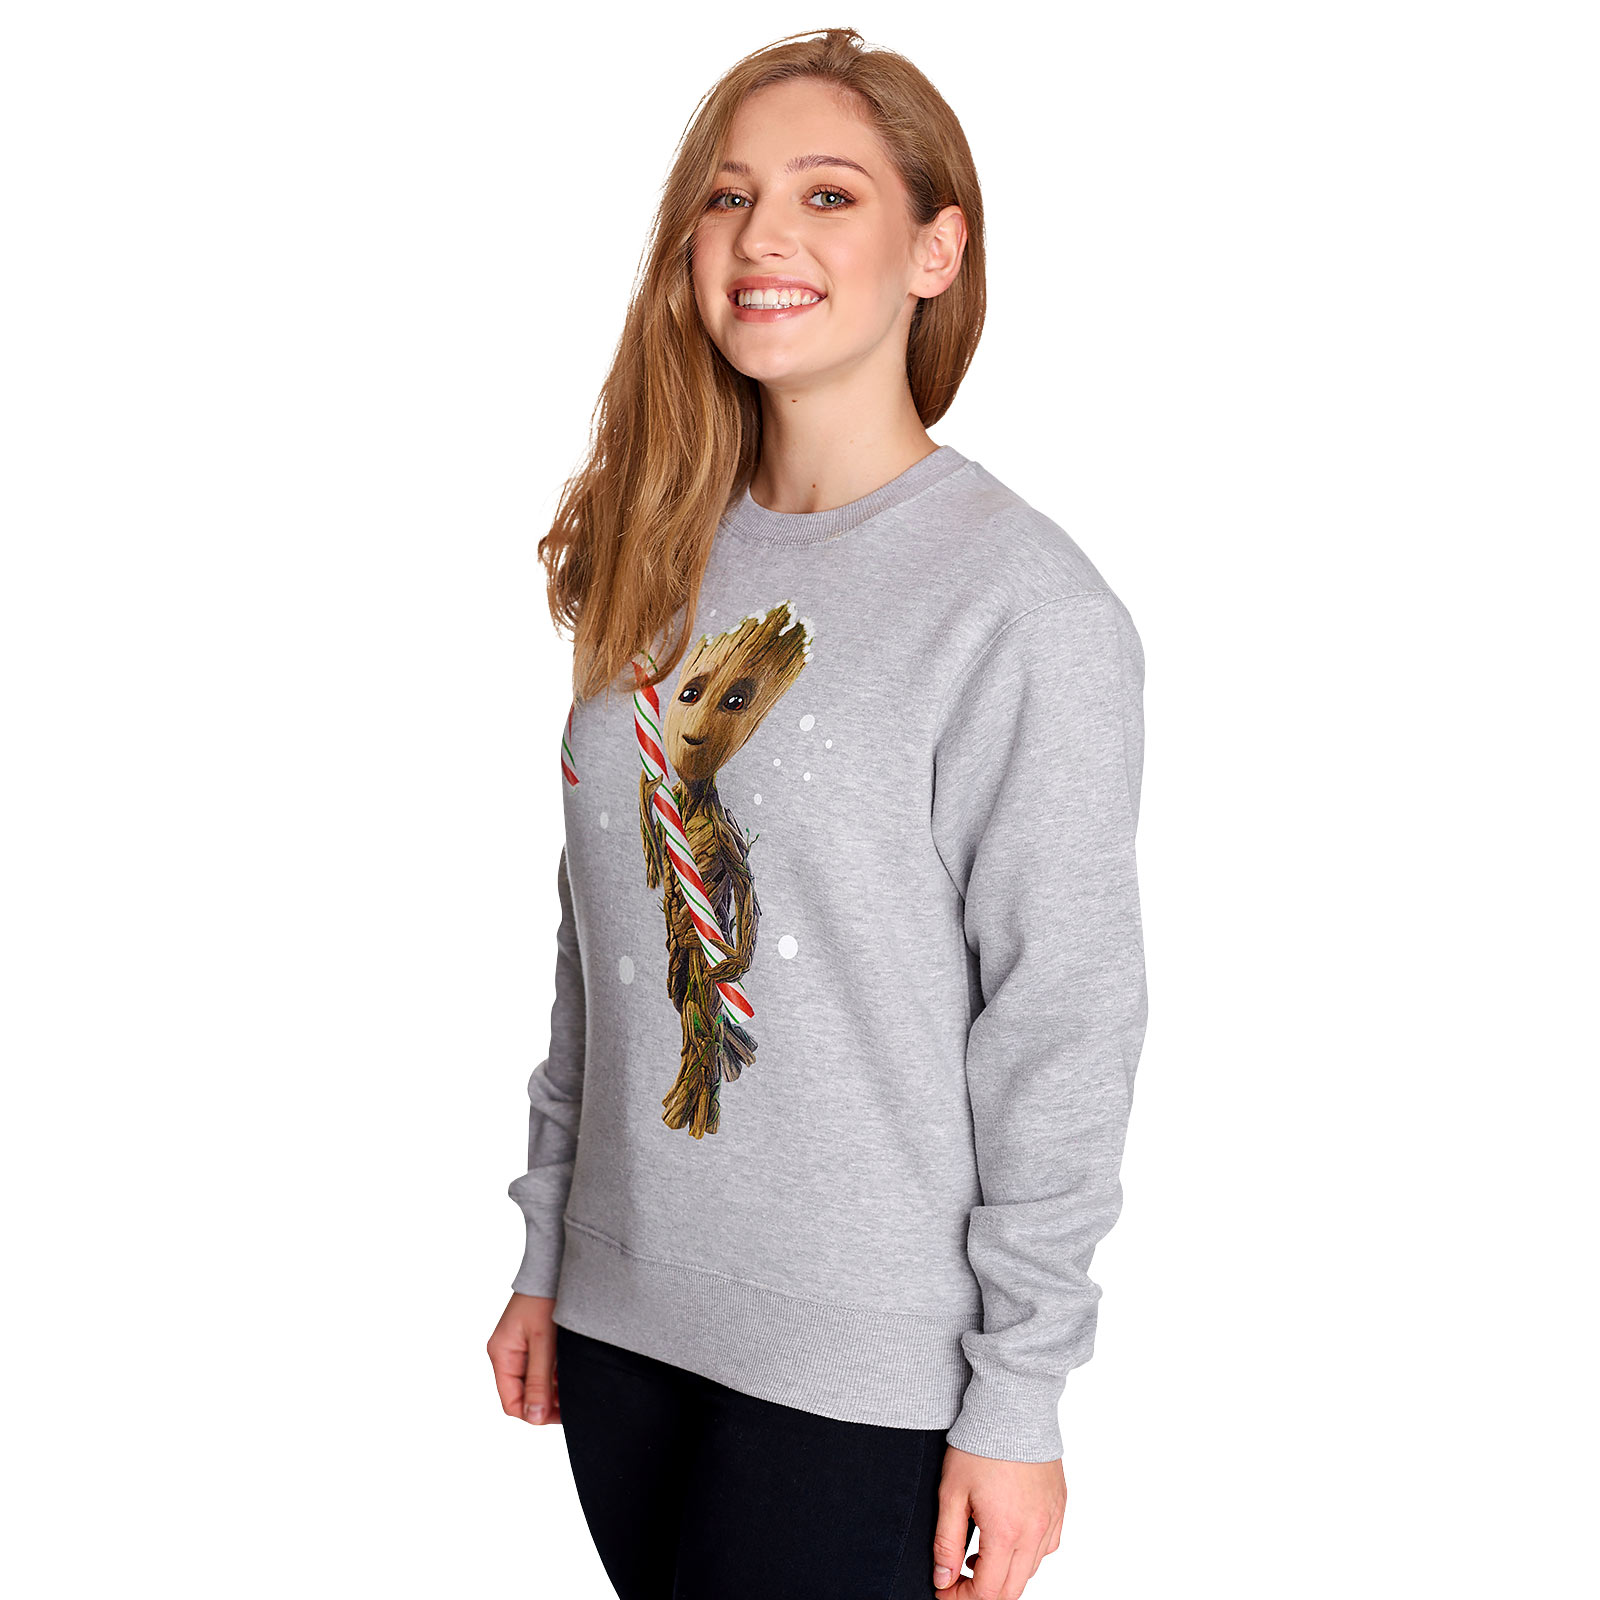 Guardians of the Galaxy - Groot with Candy Cane Sweater Grey